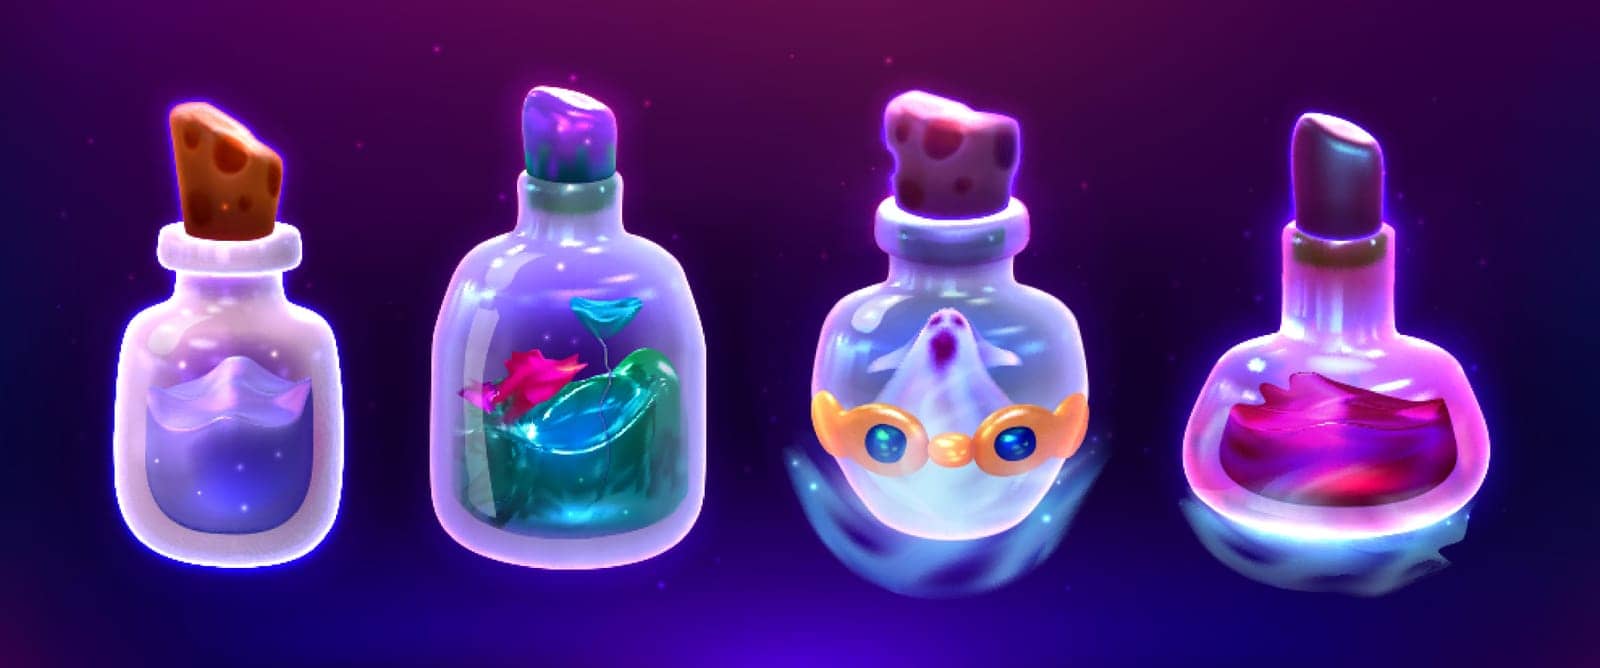 Magic potions in glass bottles with corks. Game props cartoon vector set. Liquid poisons or witchcraft accessories on dark background. Elixir of life, alchemy vials different color, substance inside.